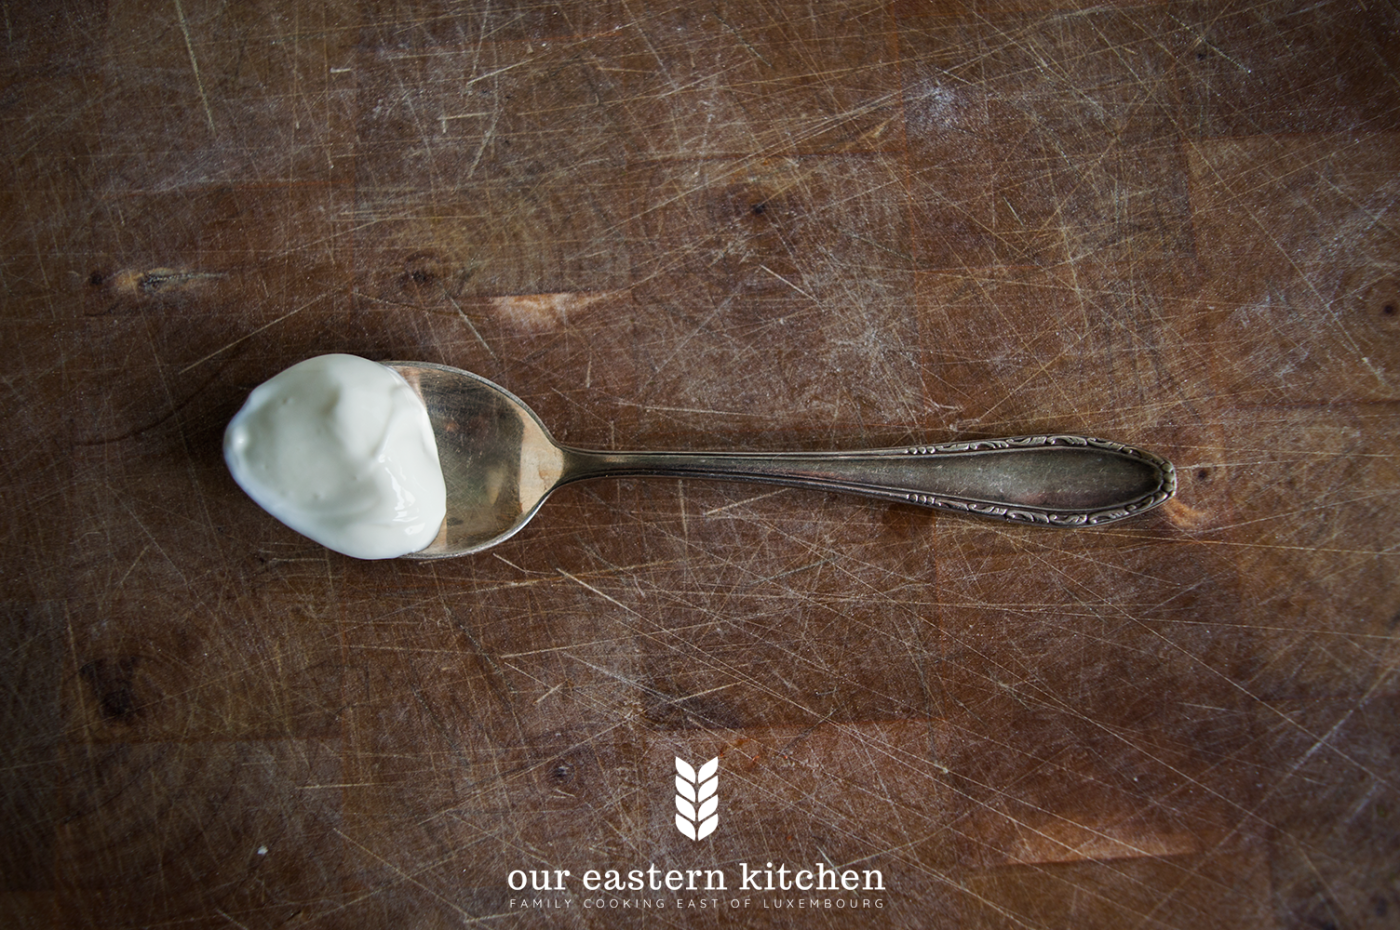 Our Eastern Kitchen - Polish Sour Cream - Recipe - Food Photography